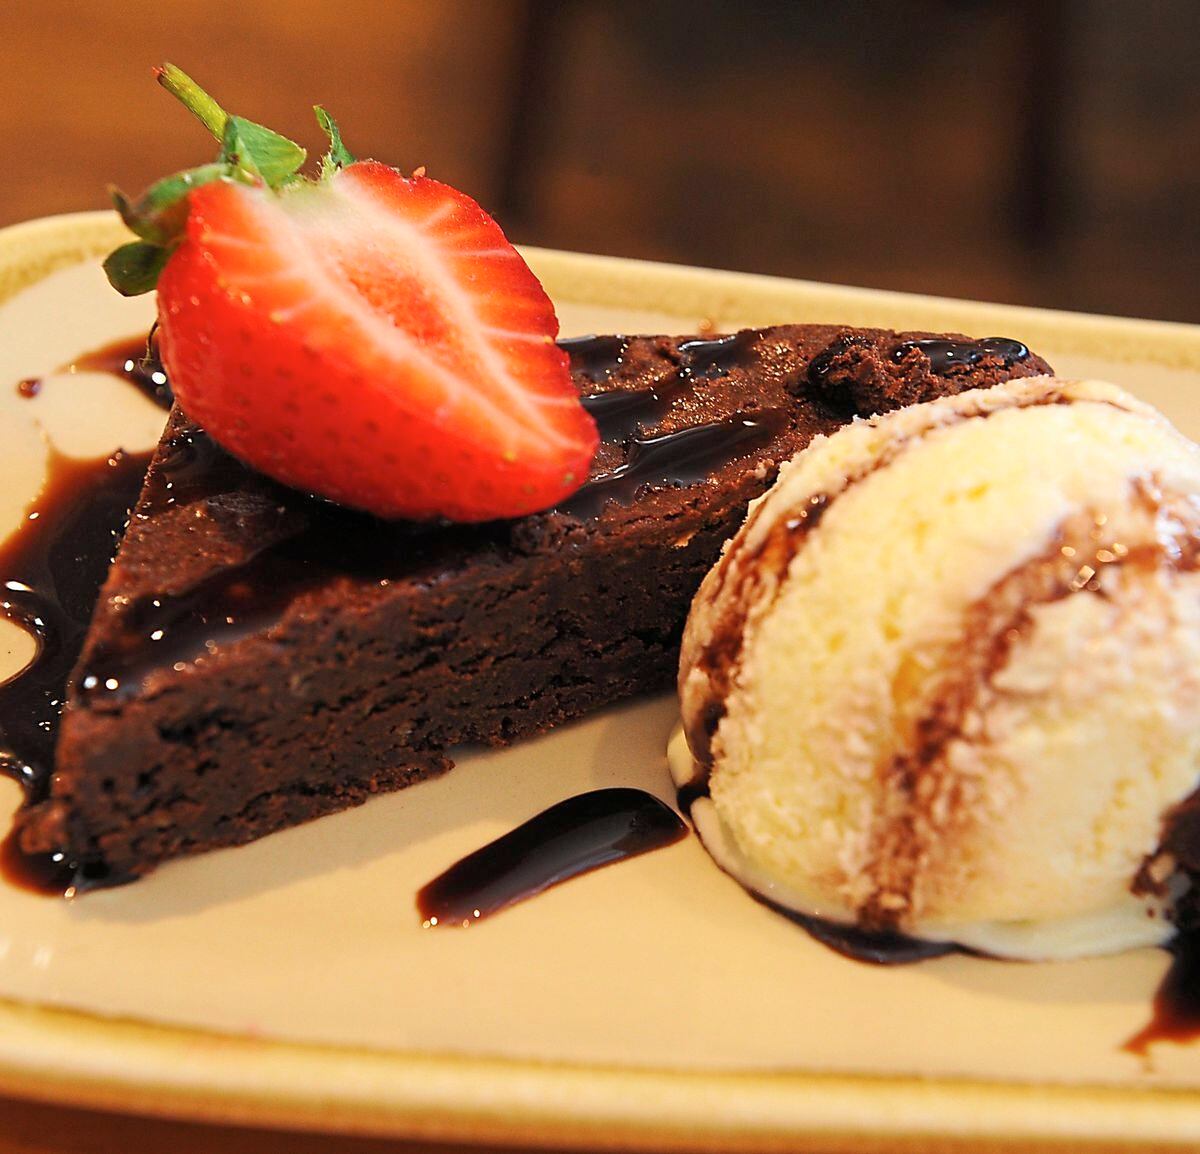 Chocolate brownies are served at the restaurant